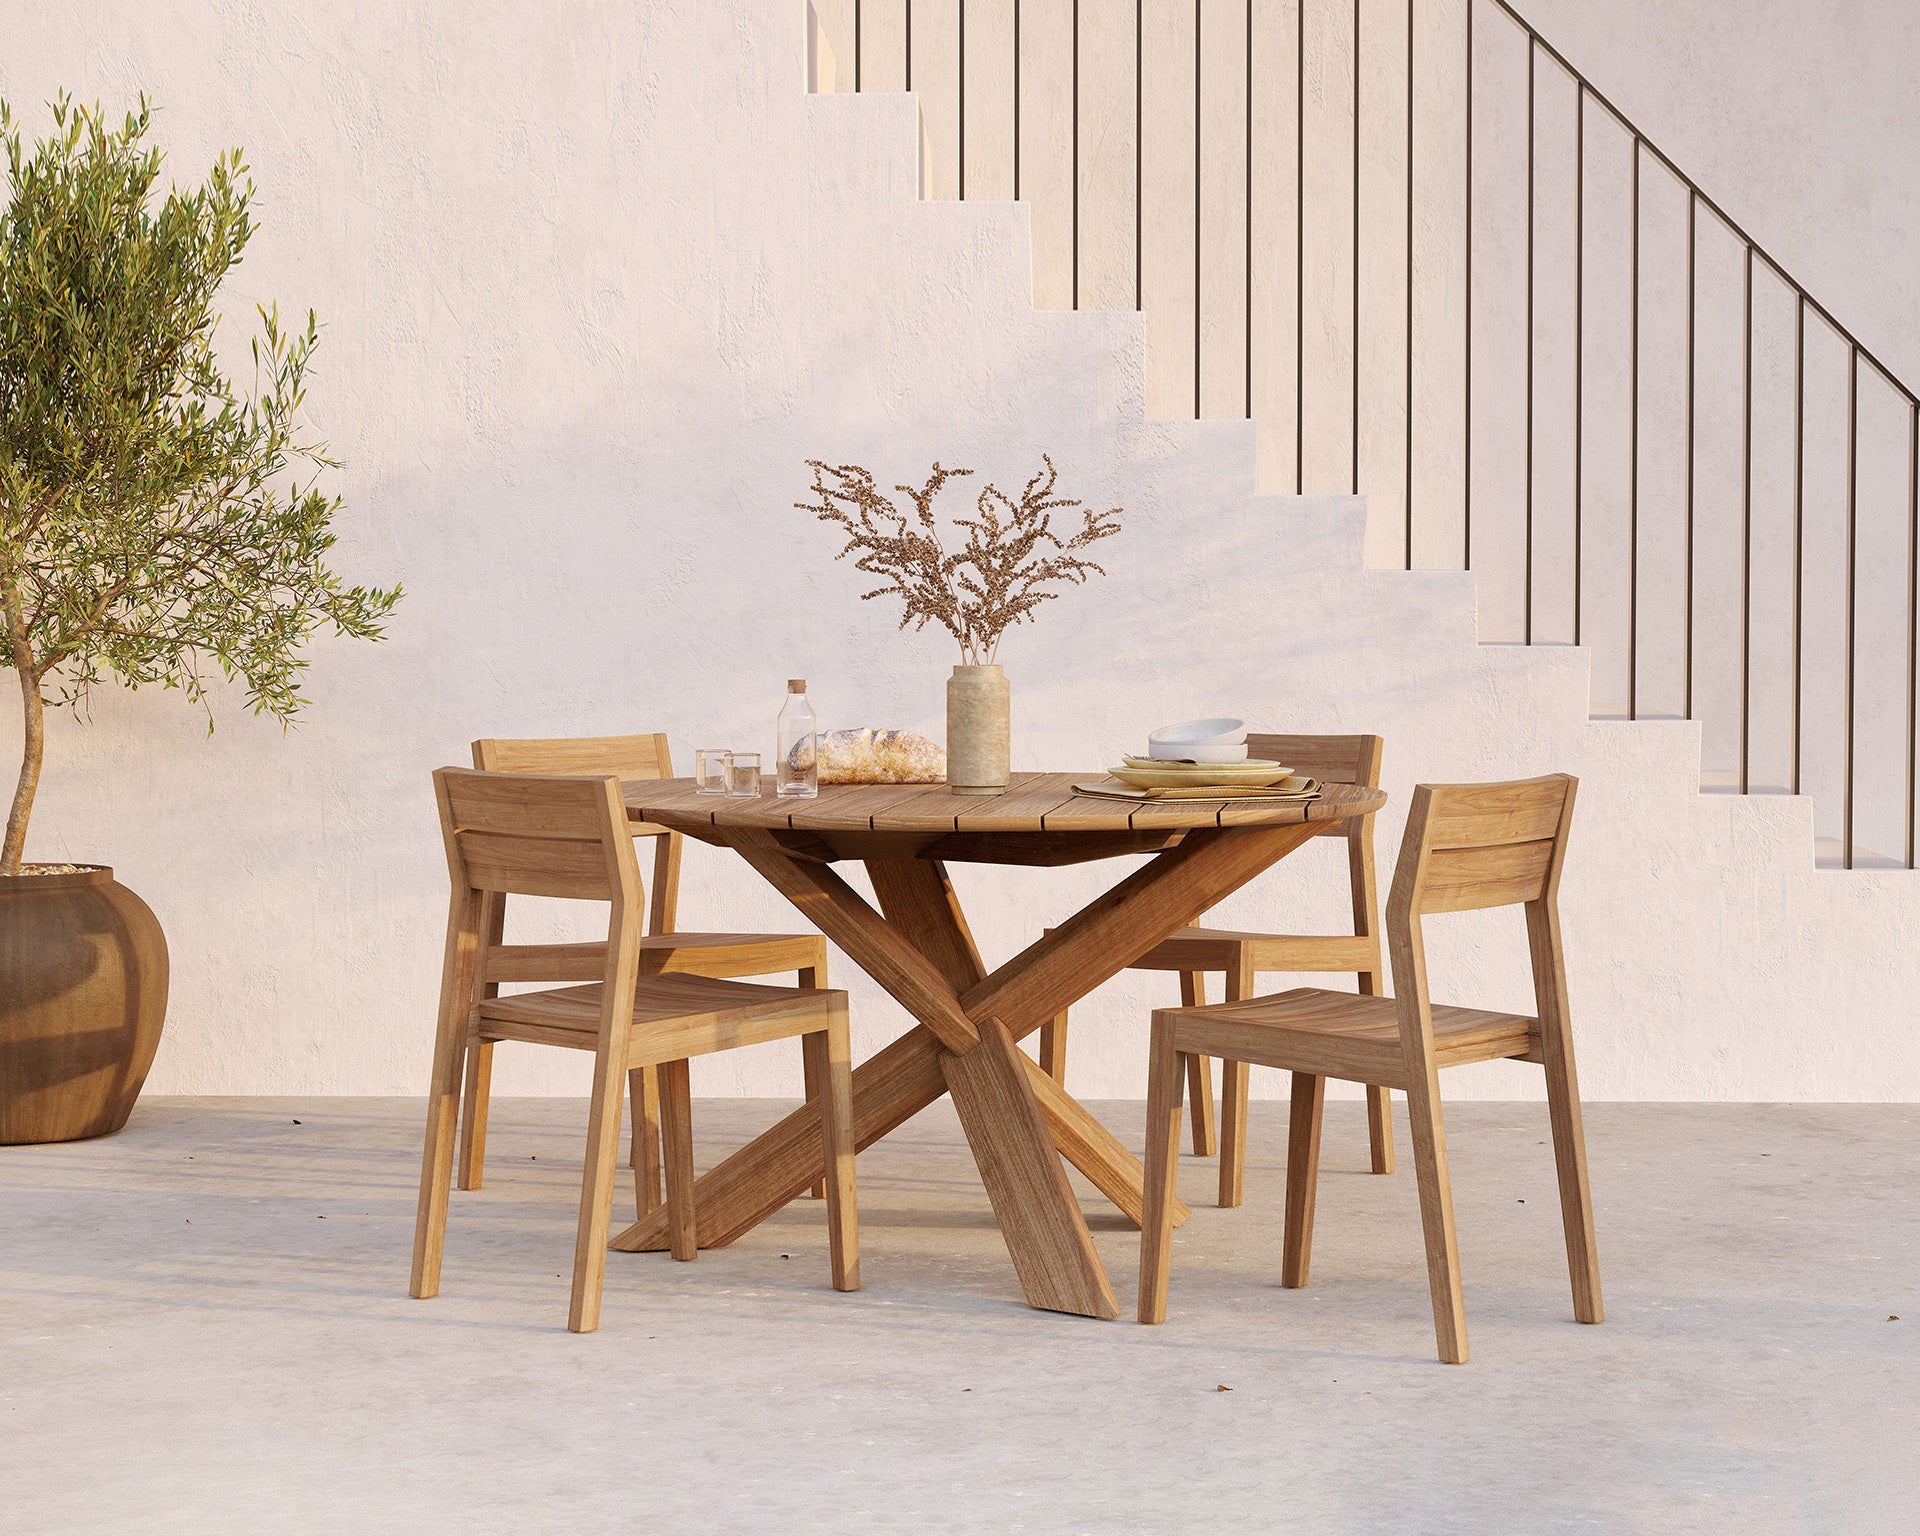 ex1 outdoor dining chair by ethnicraft at adorn.house